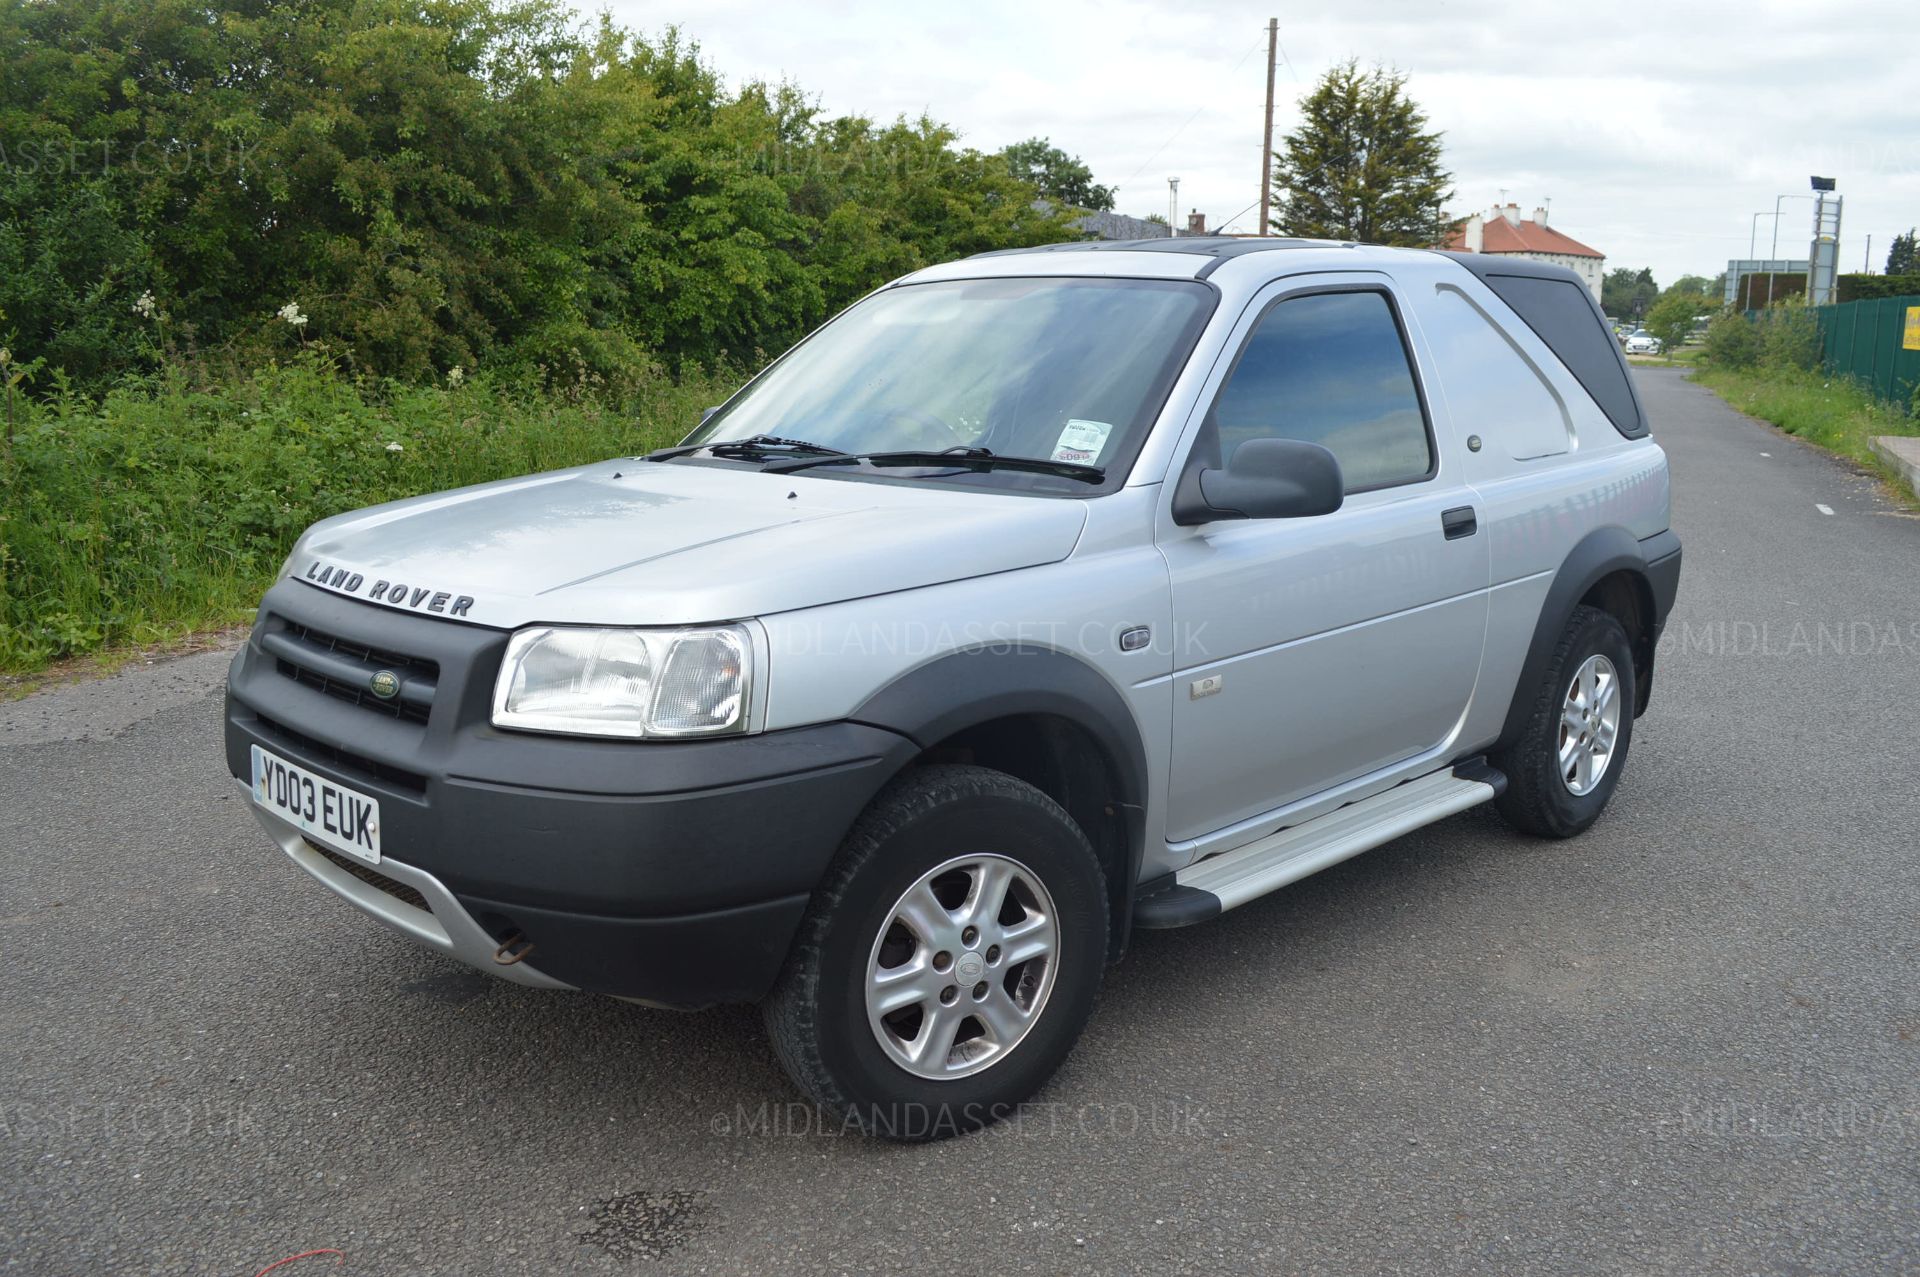 2003/03 REG LAND ROVER FREELANDER 3DR 2.0 TD4 SWB COMMERCIAL 4X4 SPECIAL VEHICLE - AIR CON *NO VAT* - Image 3 of 42